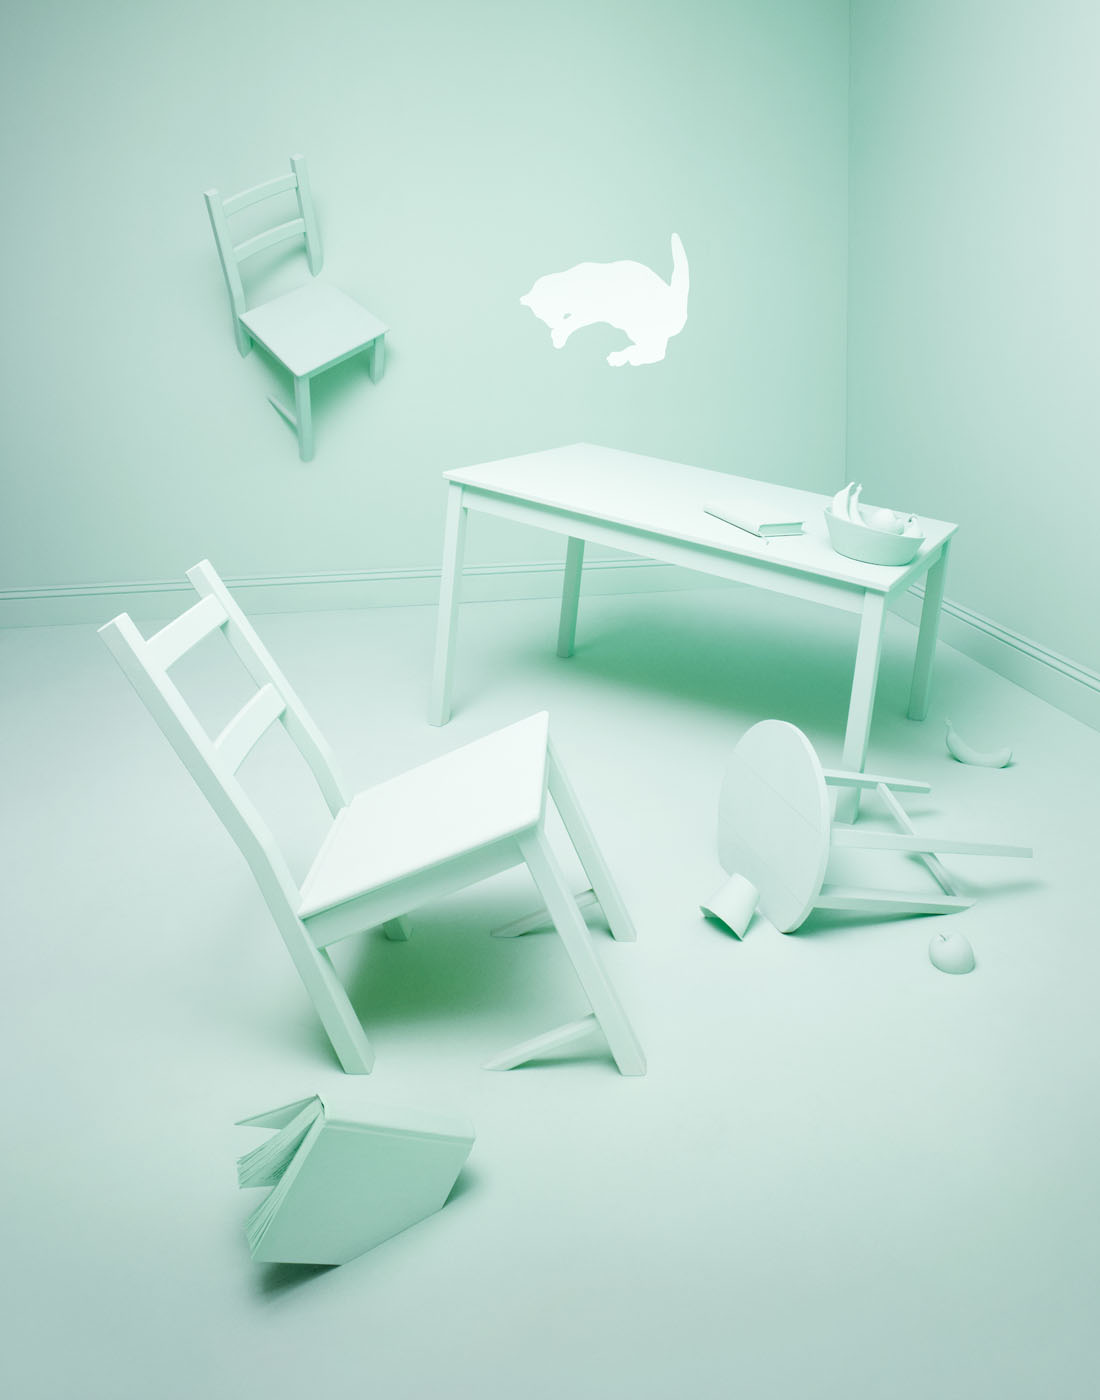 Furniture sinking in a green room by Alexander Kent London based still life and product photographer.